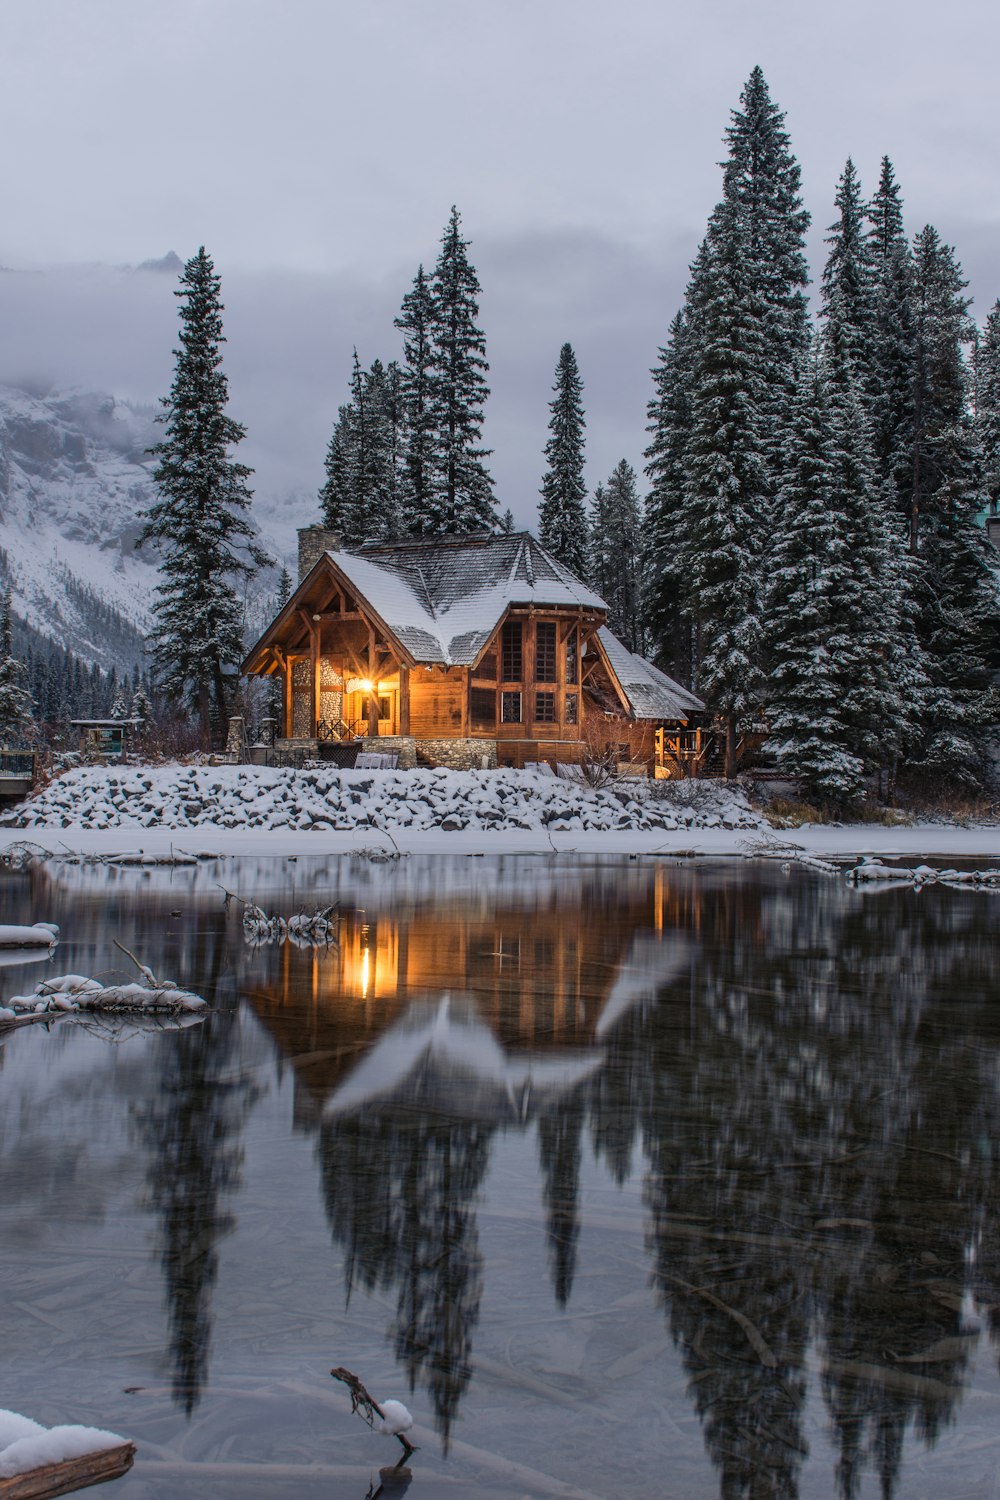 wooden house near pine trees and pond coated with snow during daytime